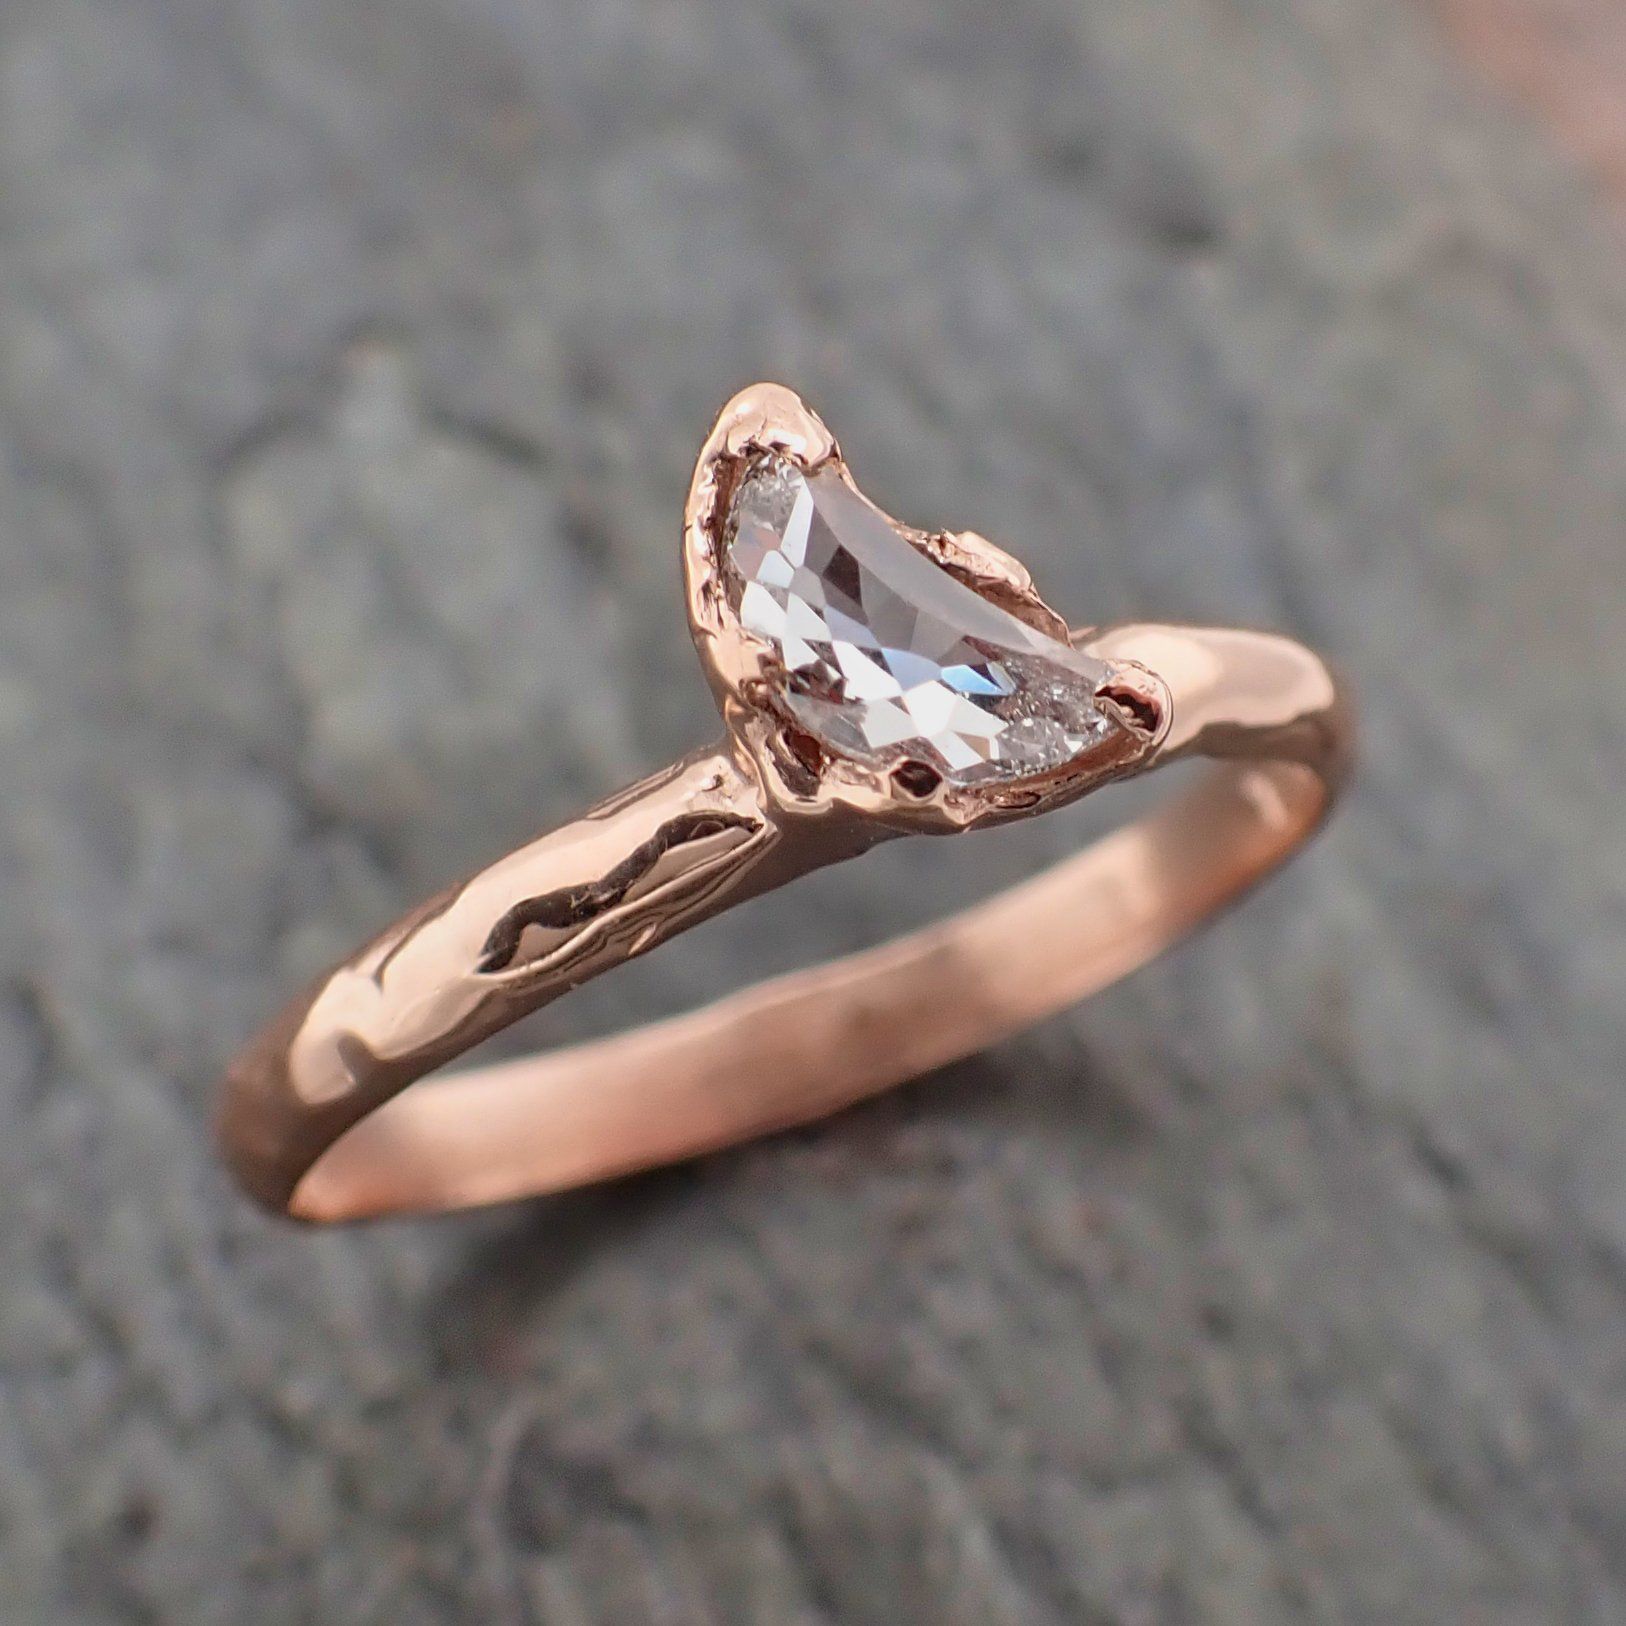 Faceted Fancy cut white crescent Moon Diamond Engagement 14k Rose Gold Solitaire Wedding Ring byAngeline 2202